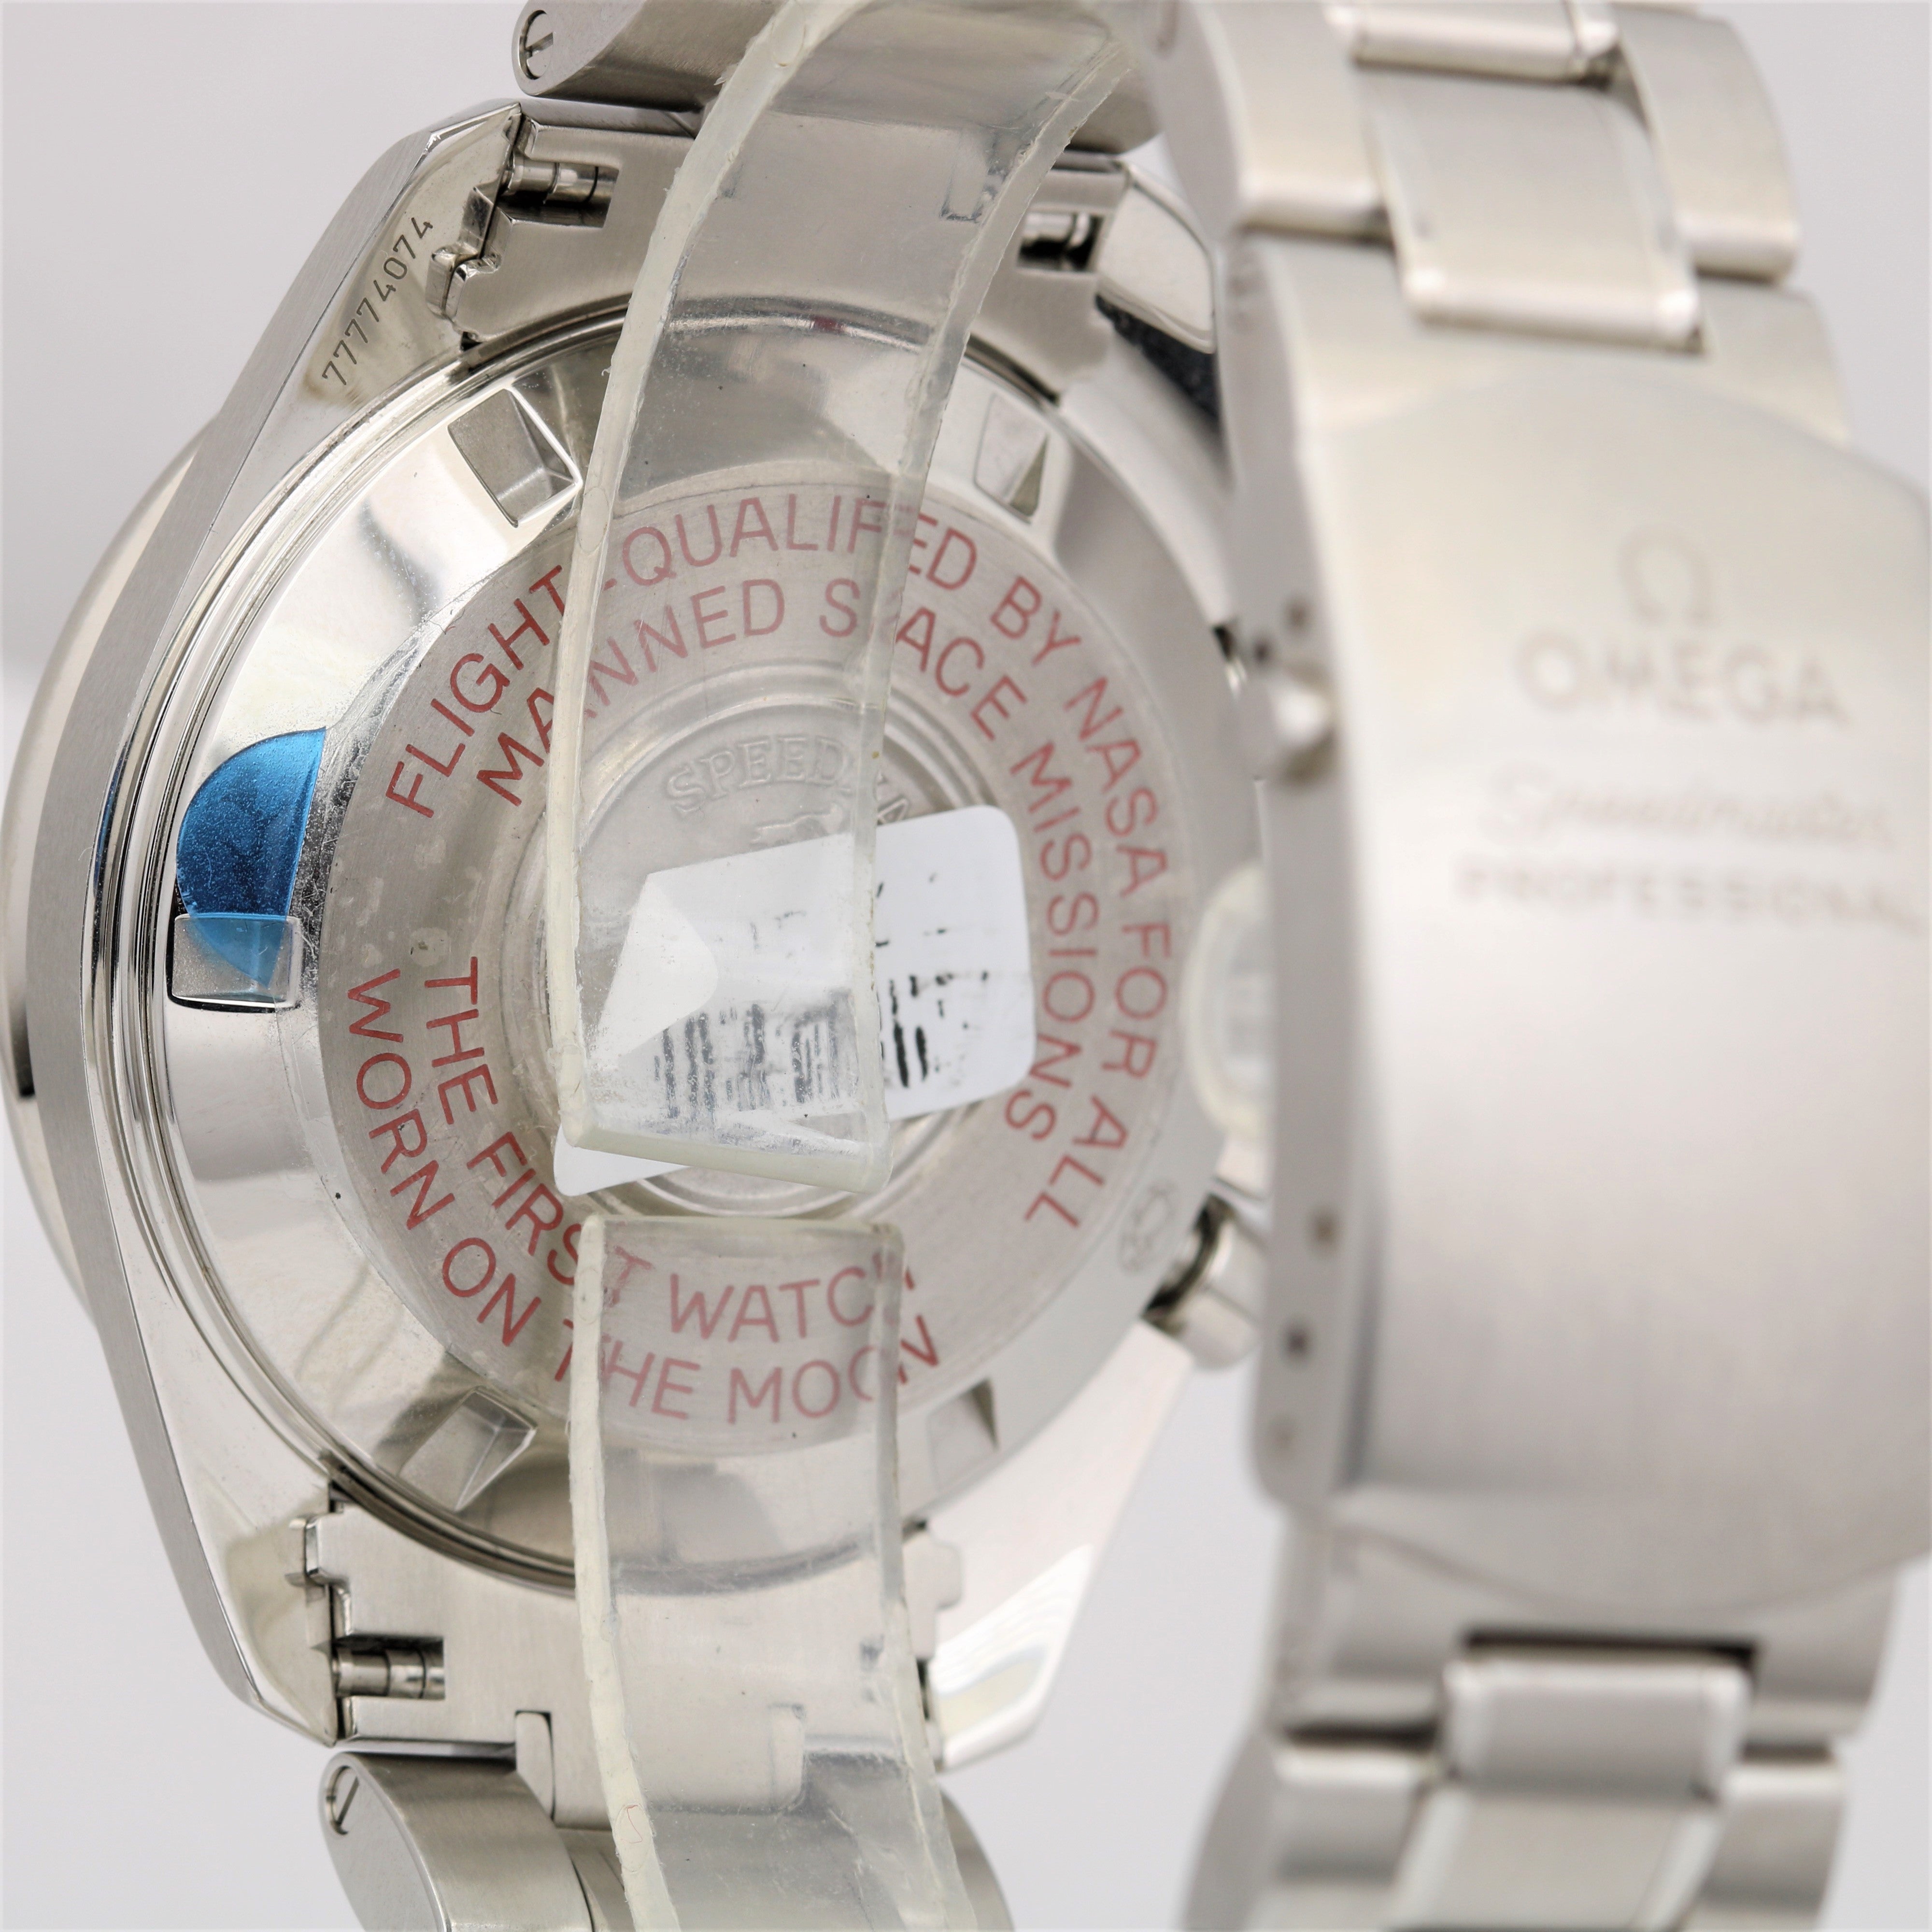 PAPERS Omega Seamaster America's Cup Racing Chronograph 2569.50.00 Steel  44mm Watch